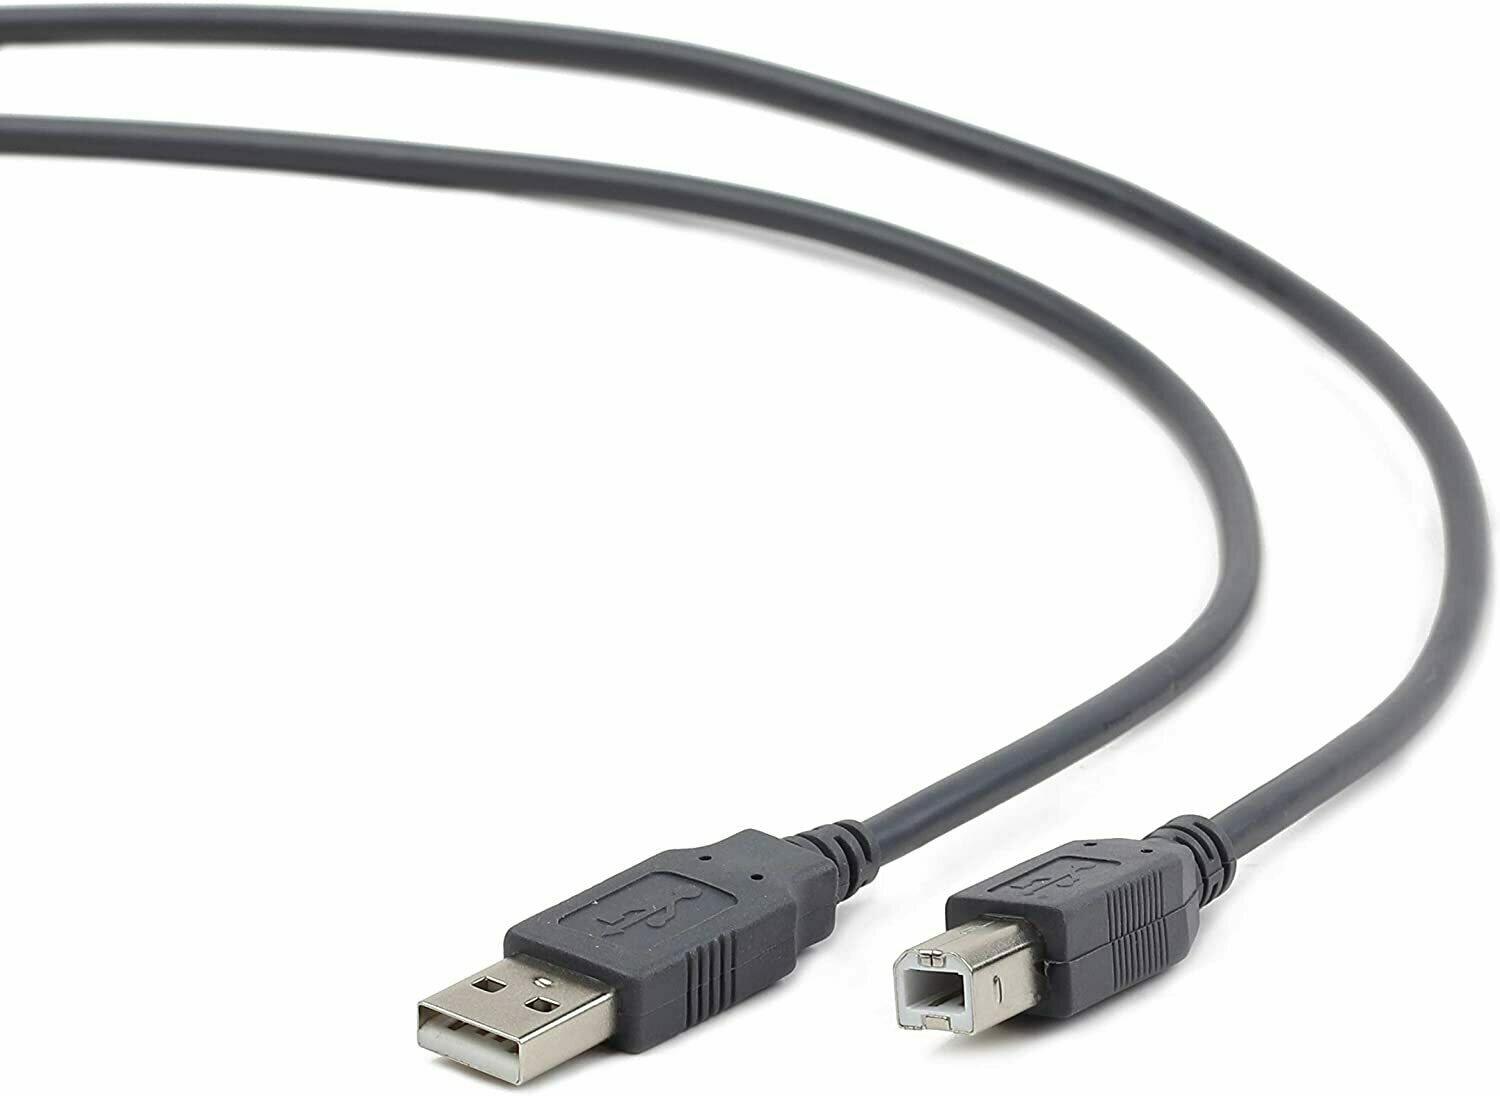 Gembird USB 2.0 A-B 1.8m Cable